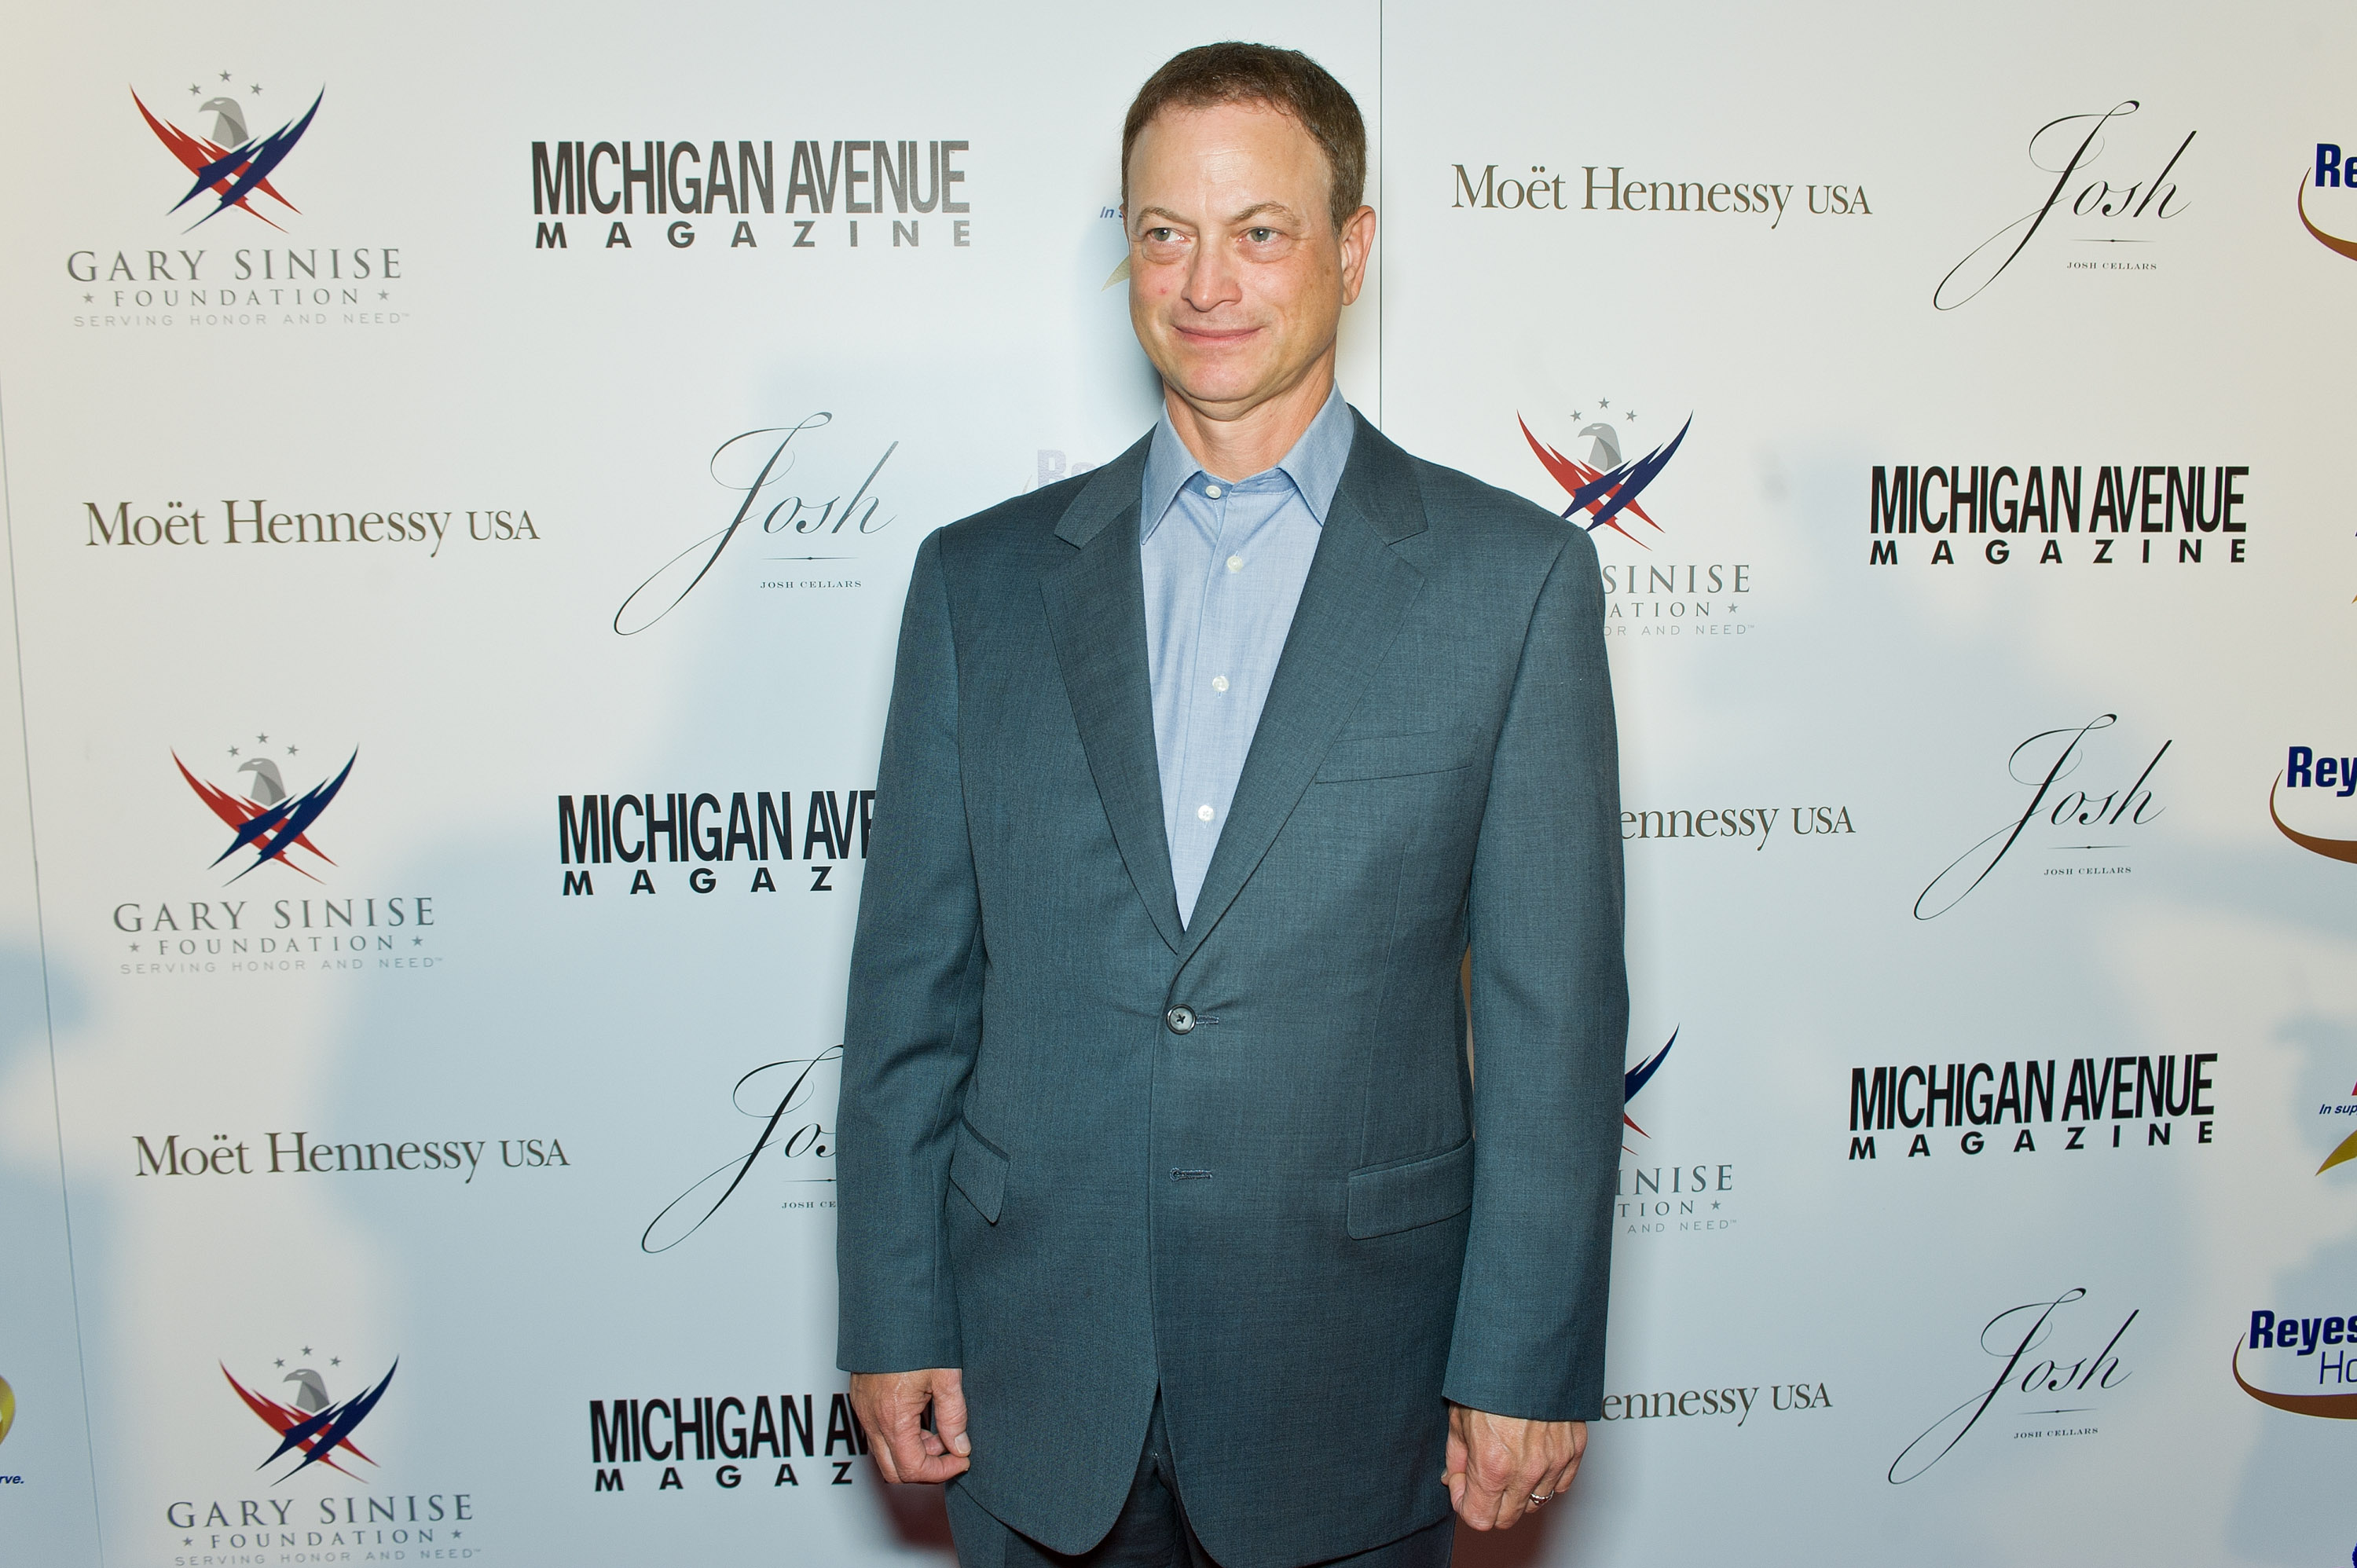 Gary Sinise attends The Gary Sinise Foundation "Inspiration To Action" Benefit Dinner at The Montgomery Club By Gibsons in Chicago, Illinois, on June 15, 2013. | Source: Getty Images